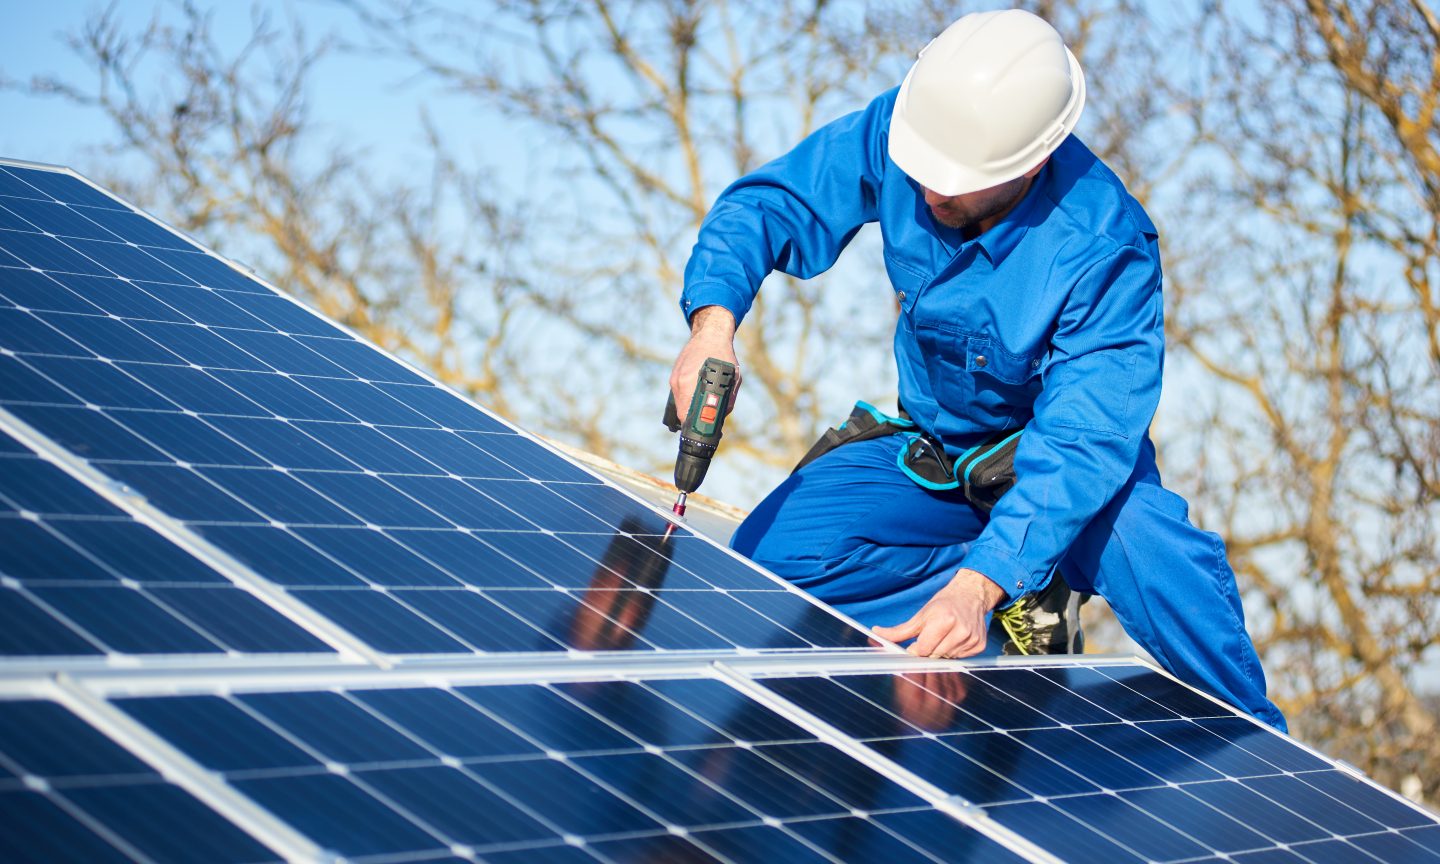 There are many reasons why homeowners go solar,